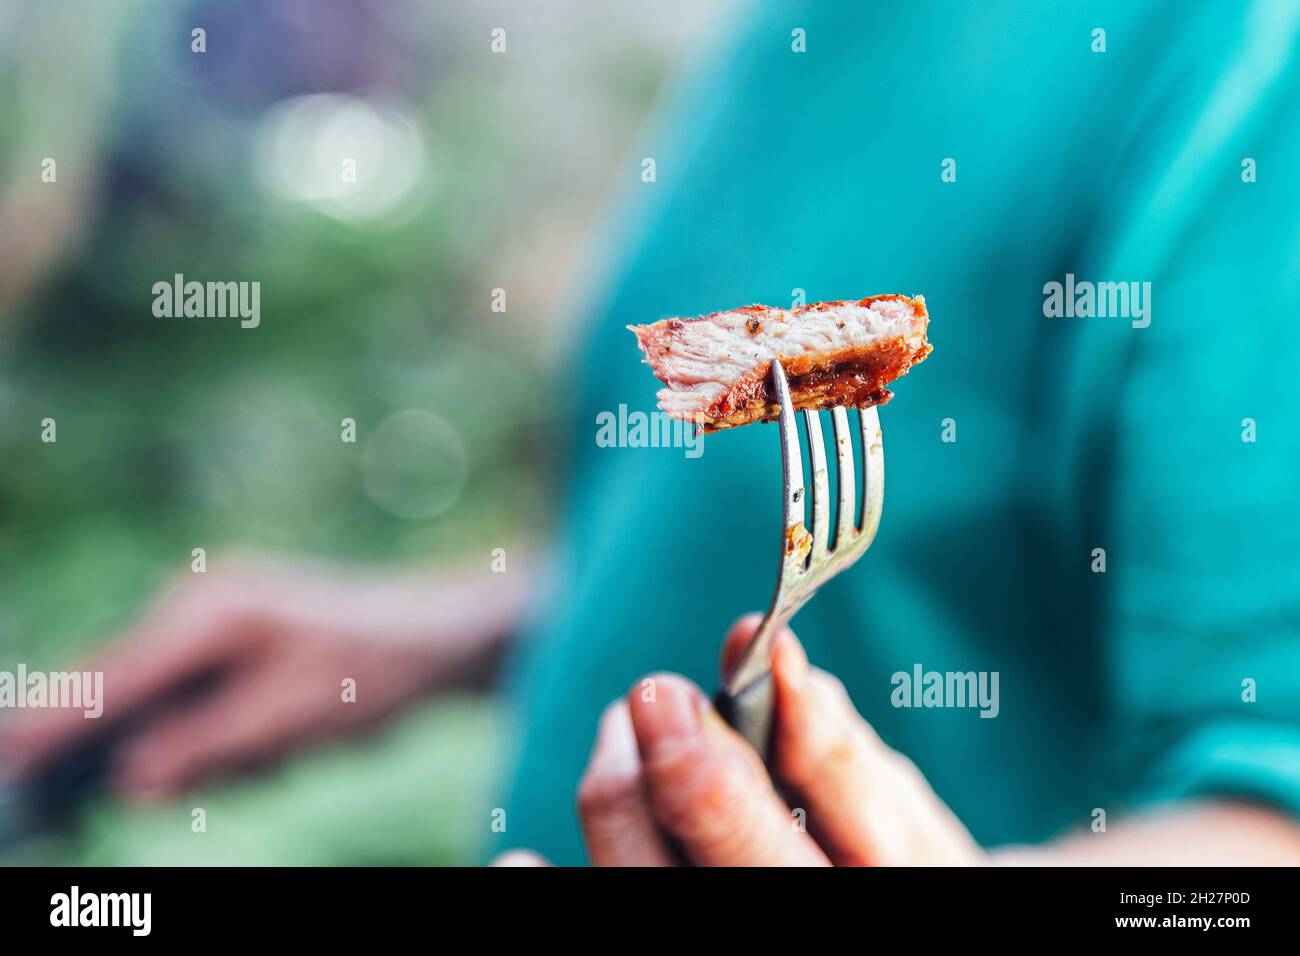 Man offering a piece of meat roasted with a fork. Stock Photo